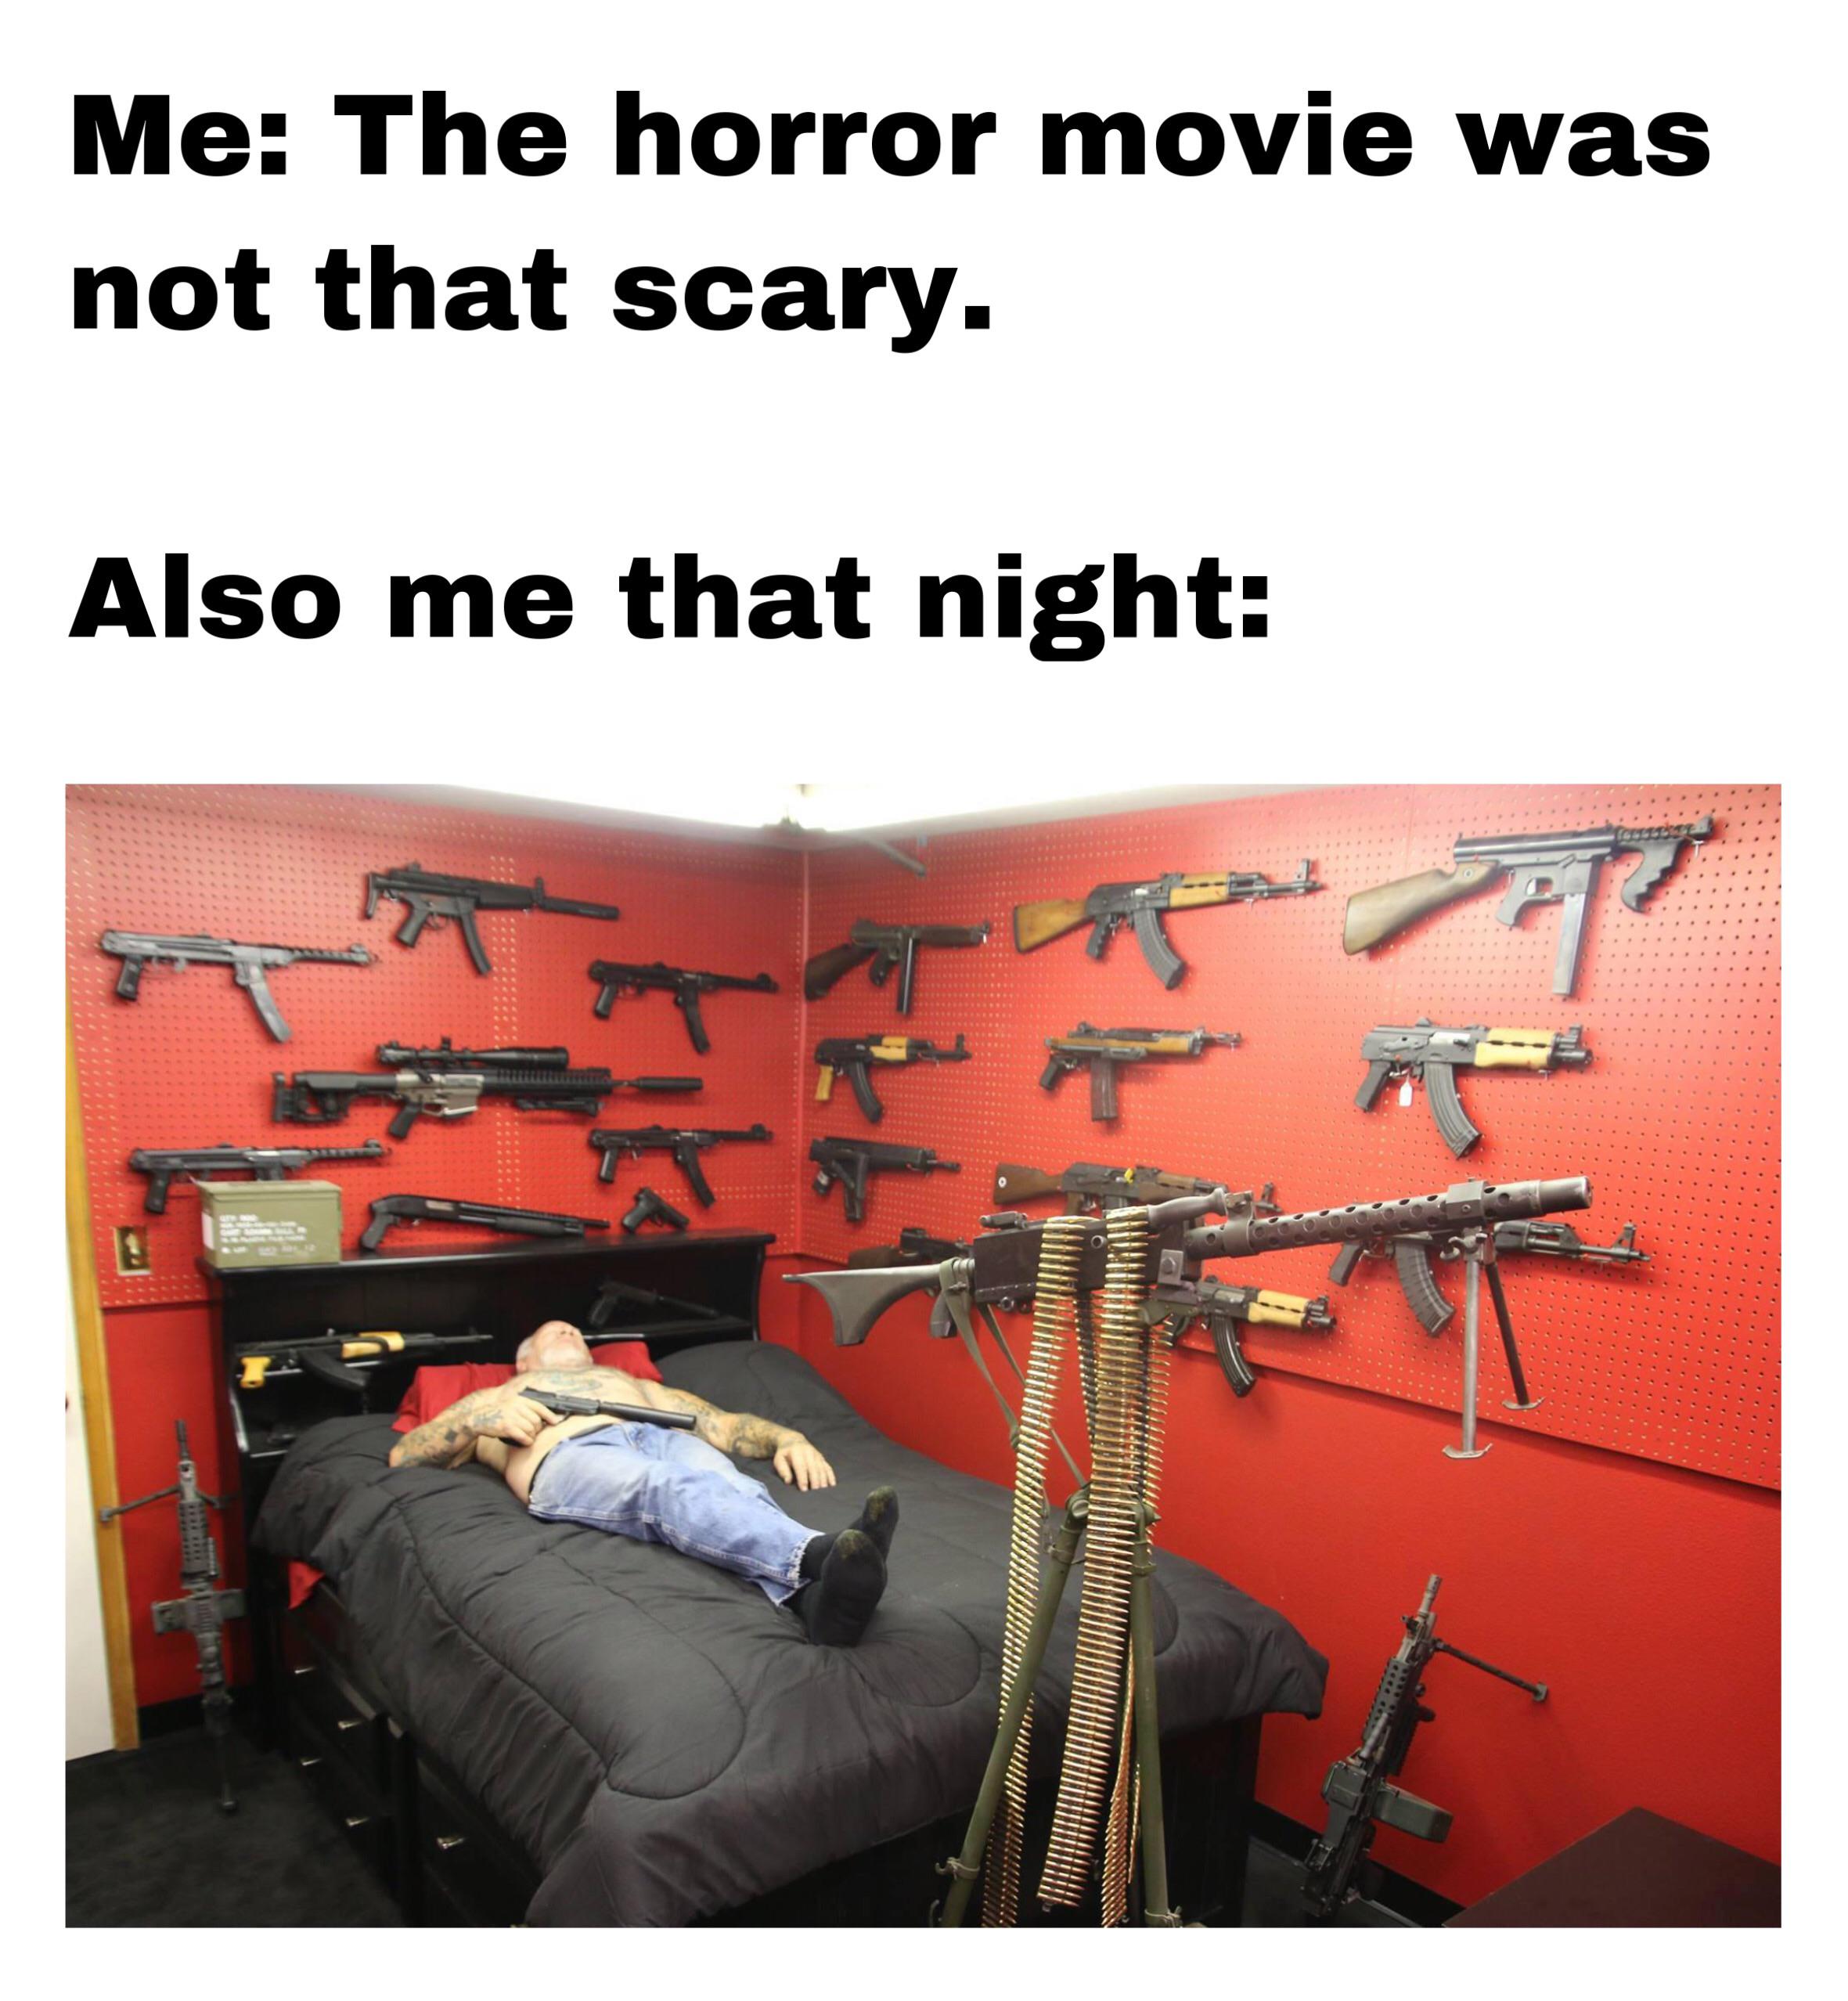 us most armed man - Me The horror movie was not that scary. Also me that night zip